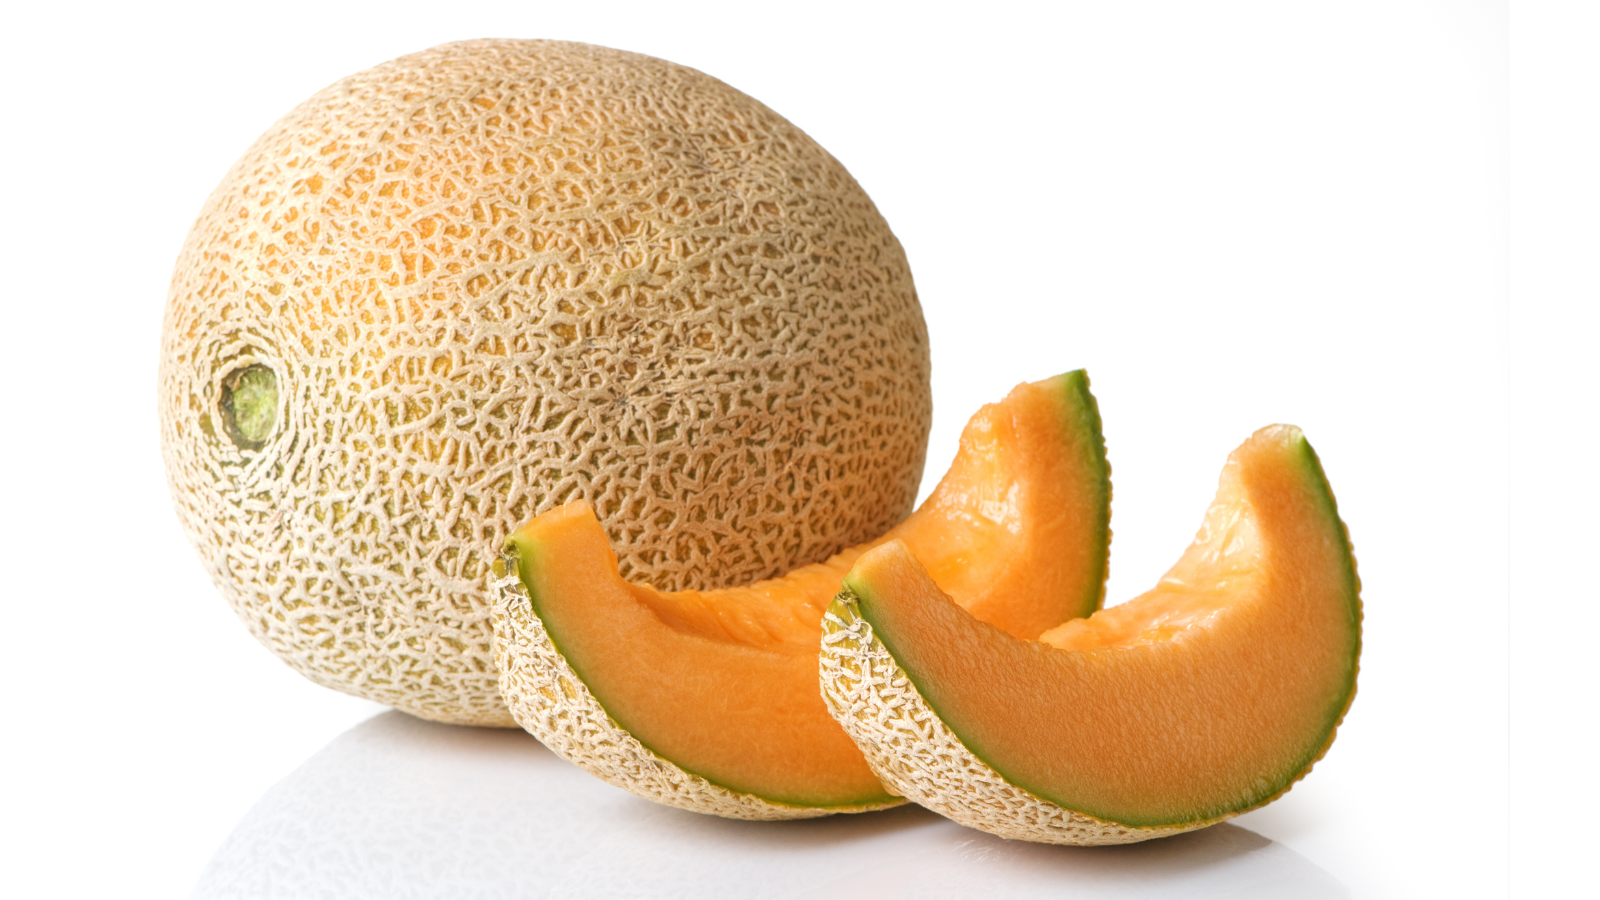 Two slices of cantaloupe sit next to a whole cantaloupe